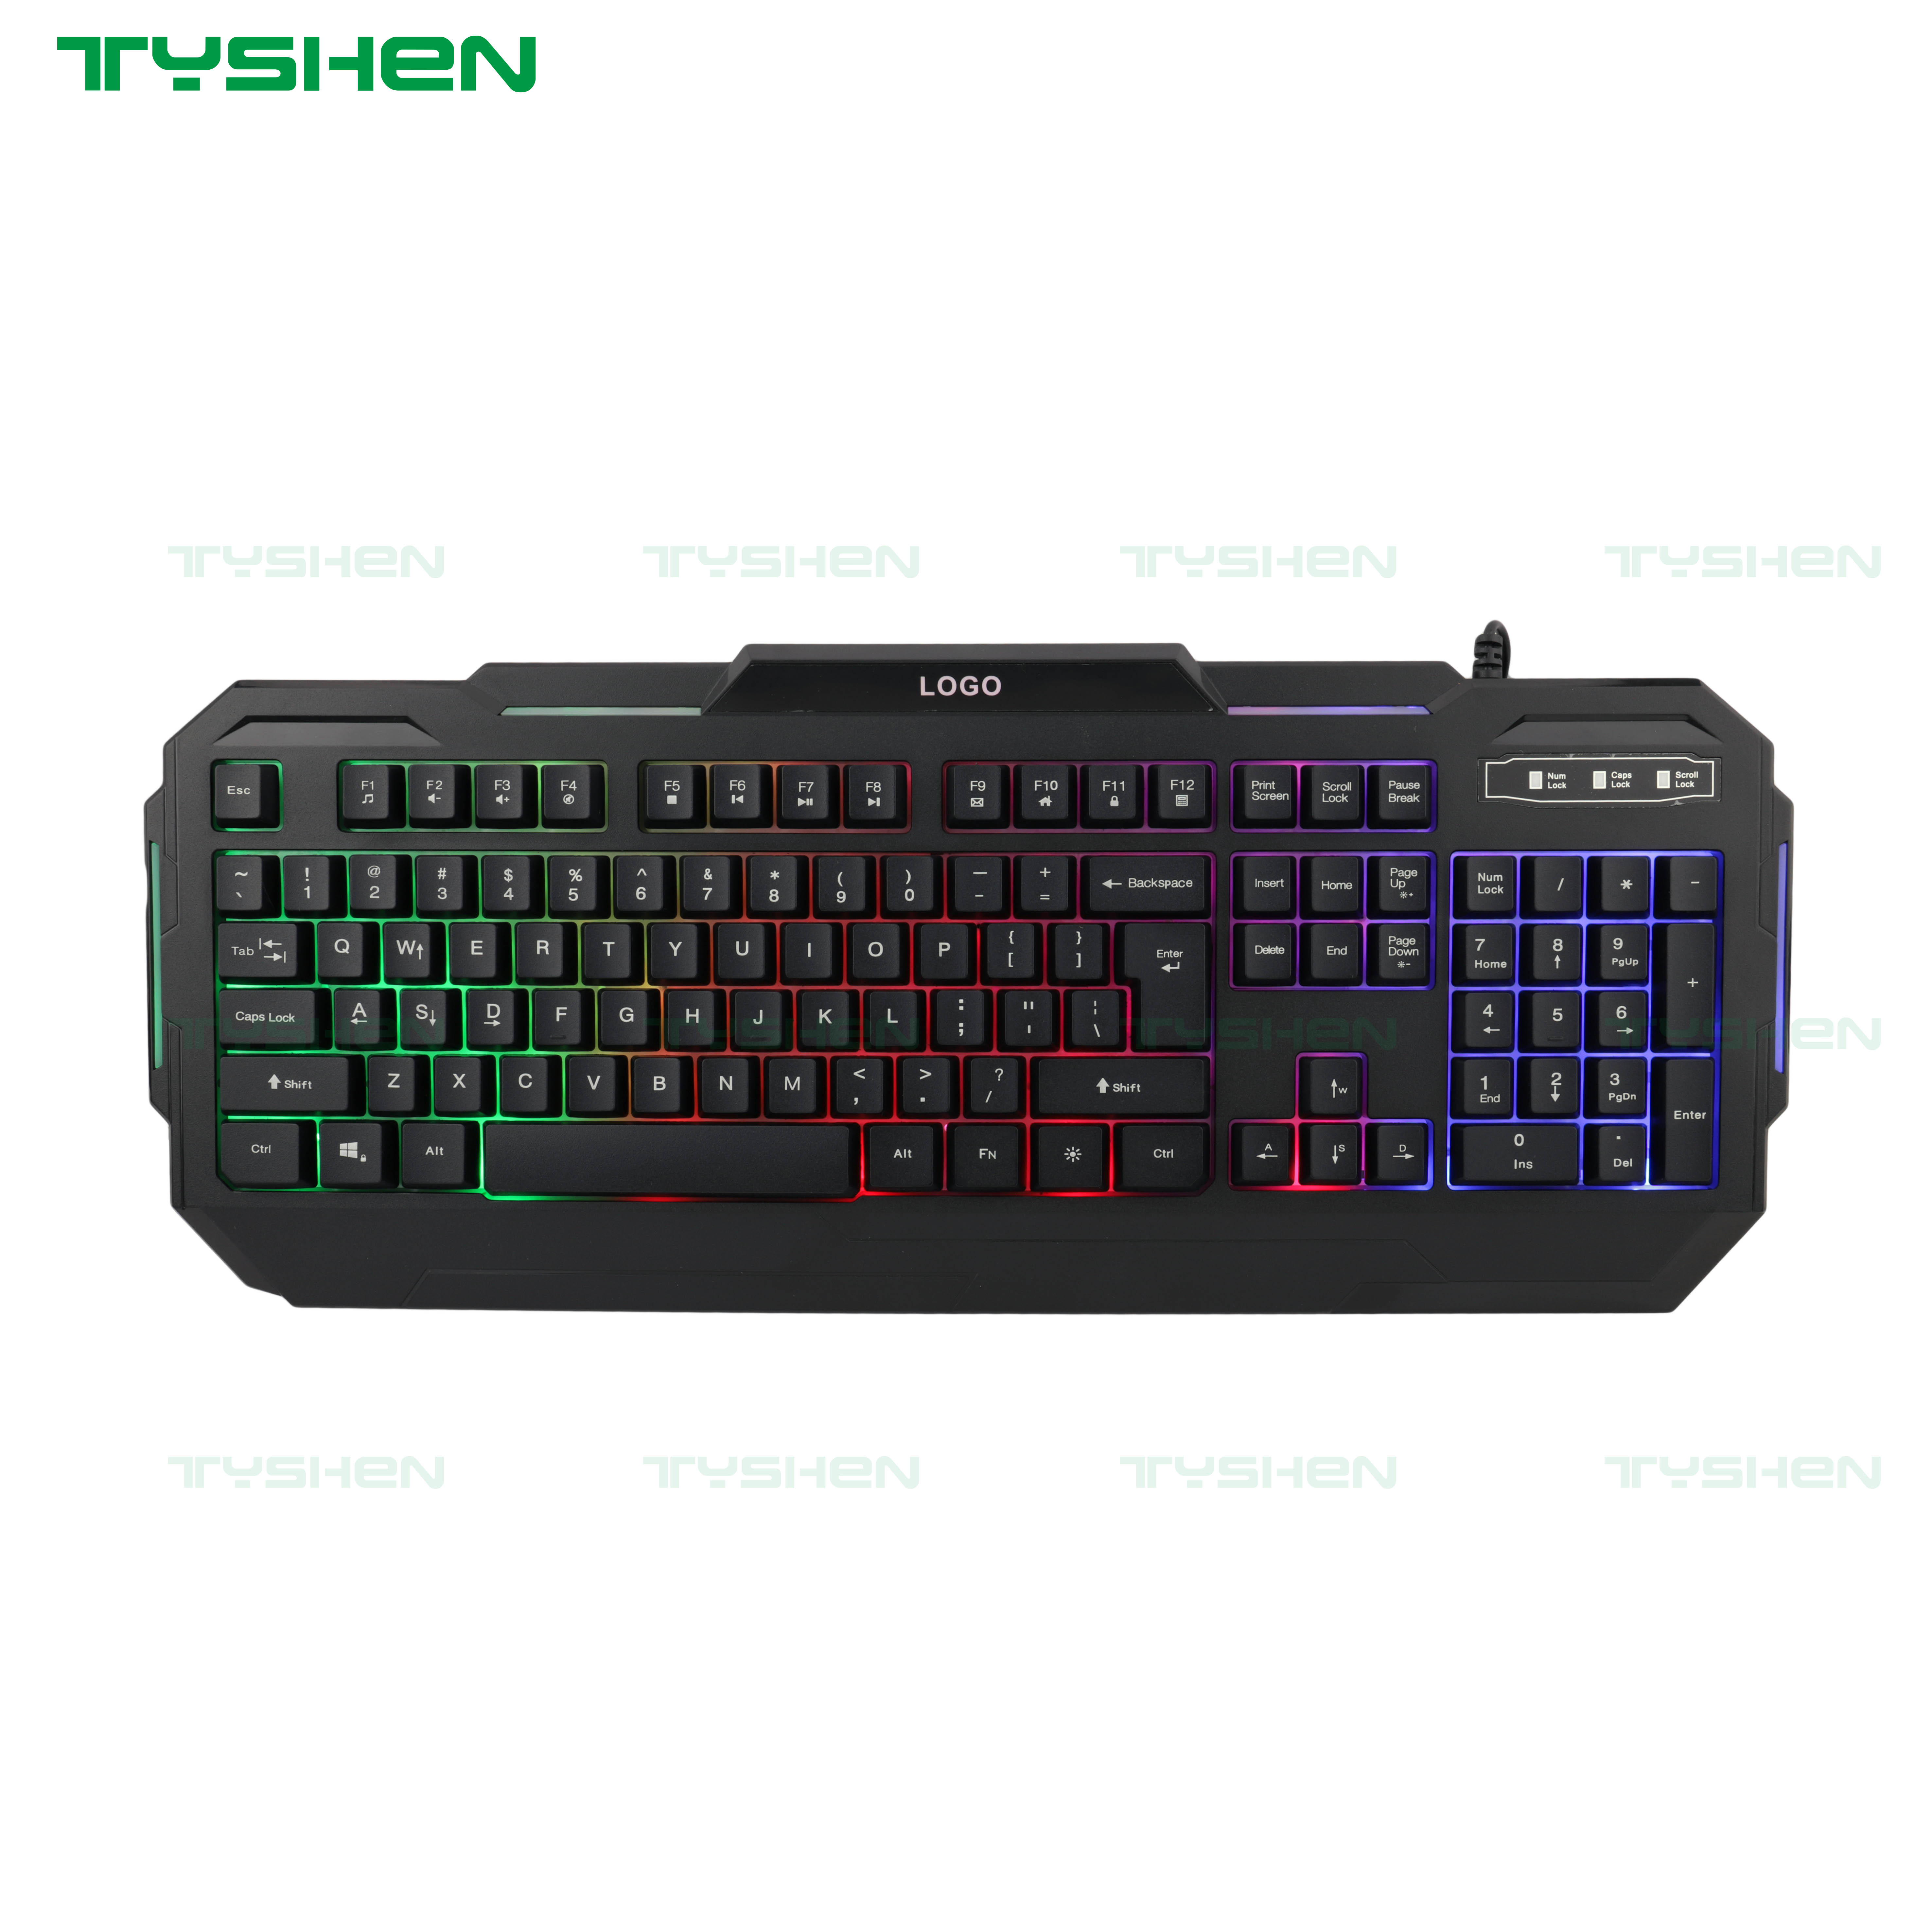 4 in 1 gaming combo kit include gamer keyboard mouse headphone mouse pad for desk table computer PC office game use